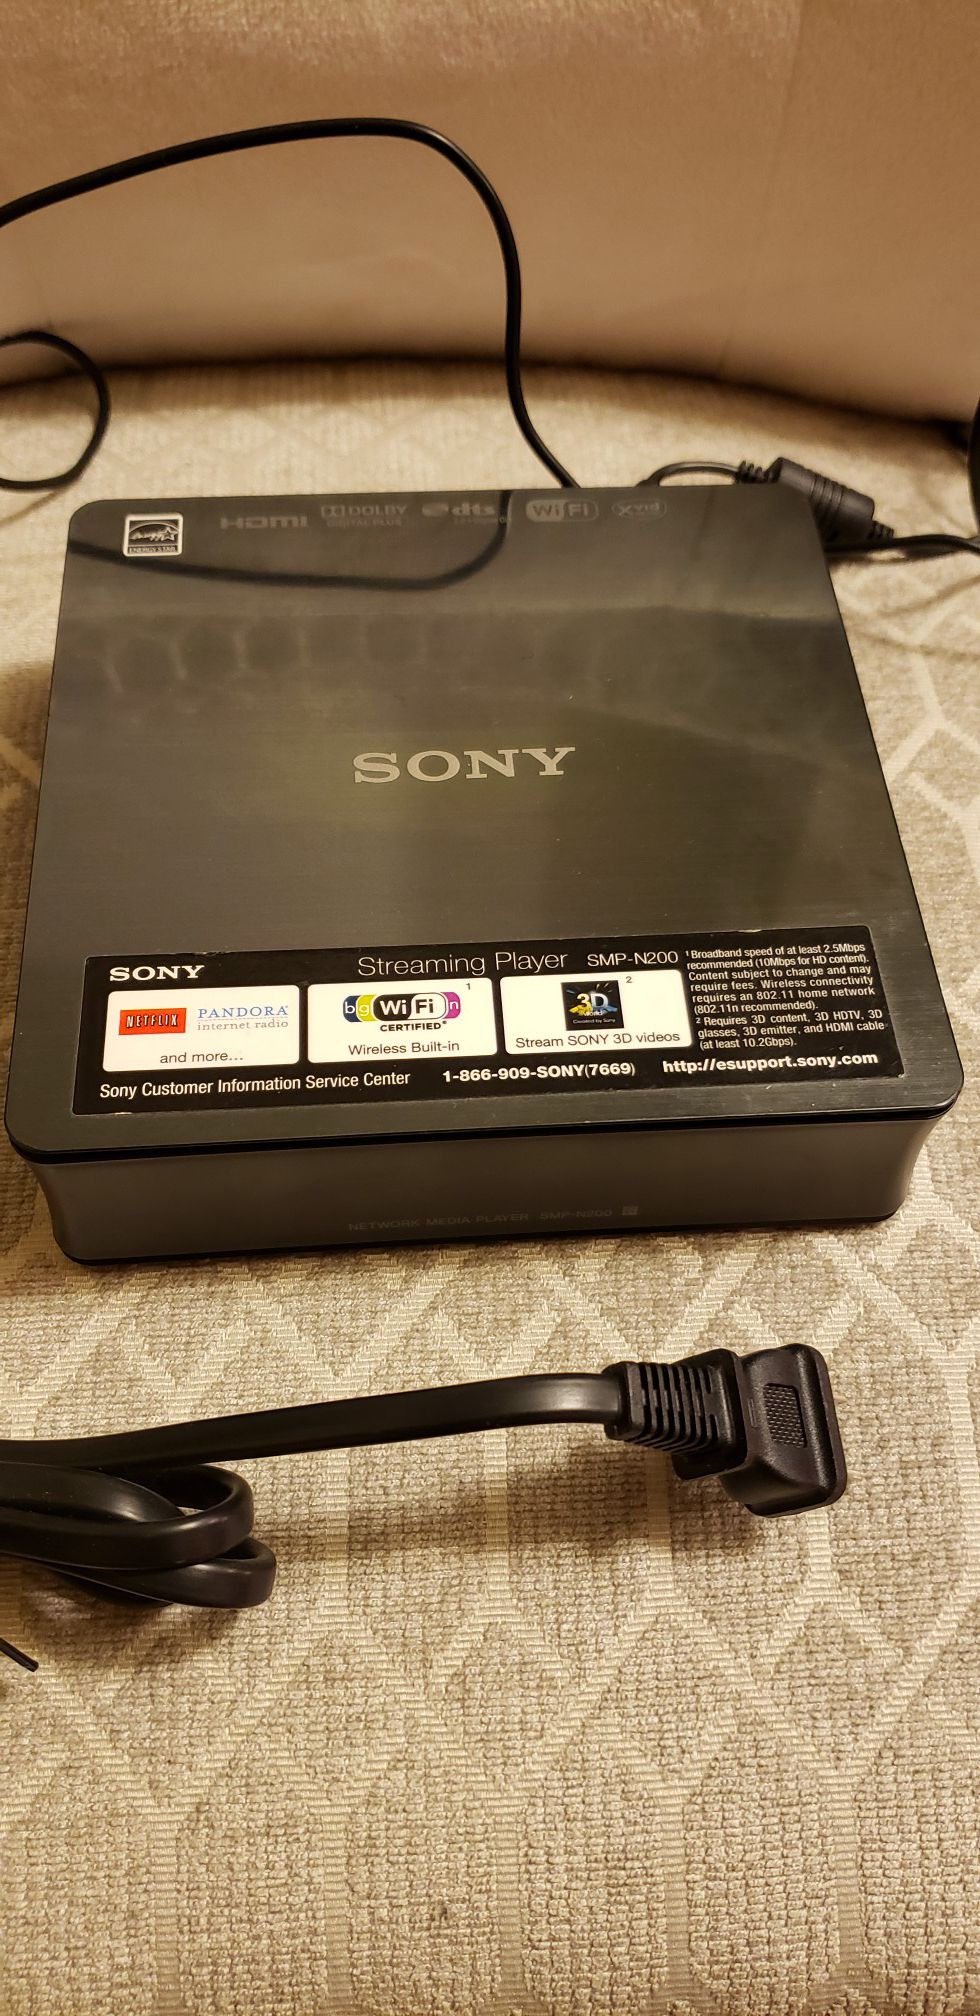 Sony Streaming Player SMP-N200